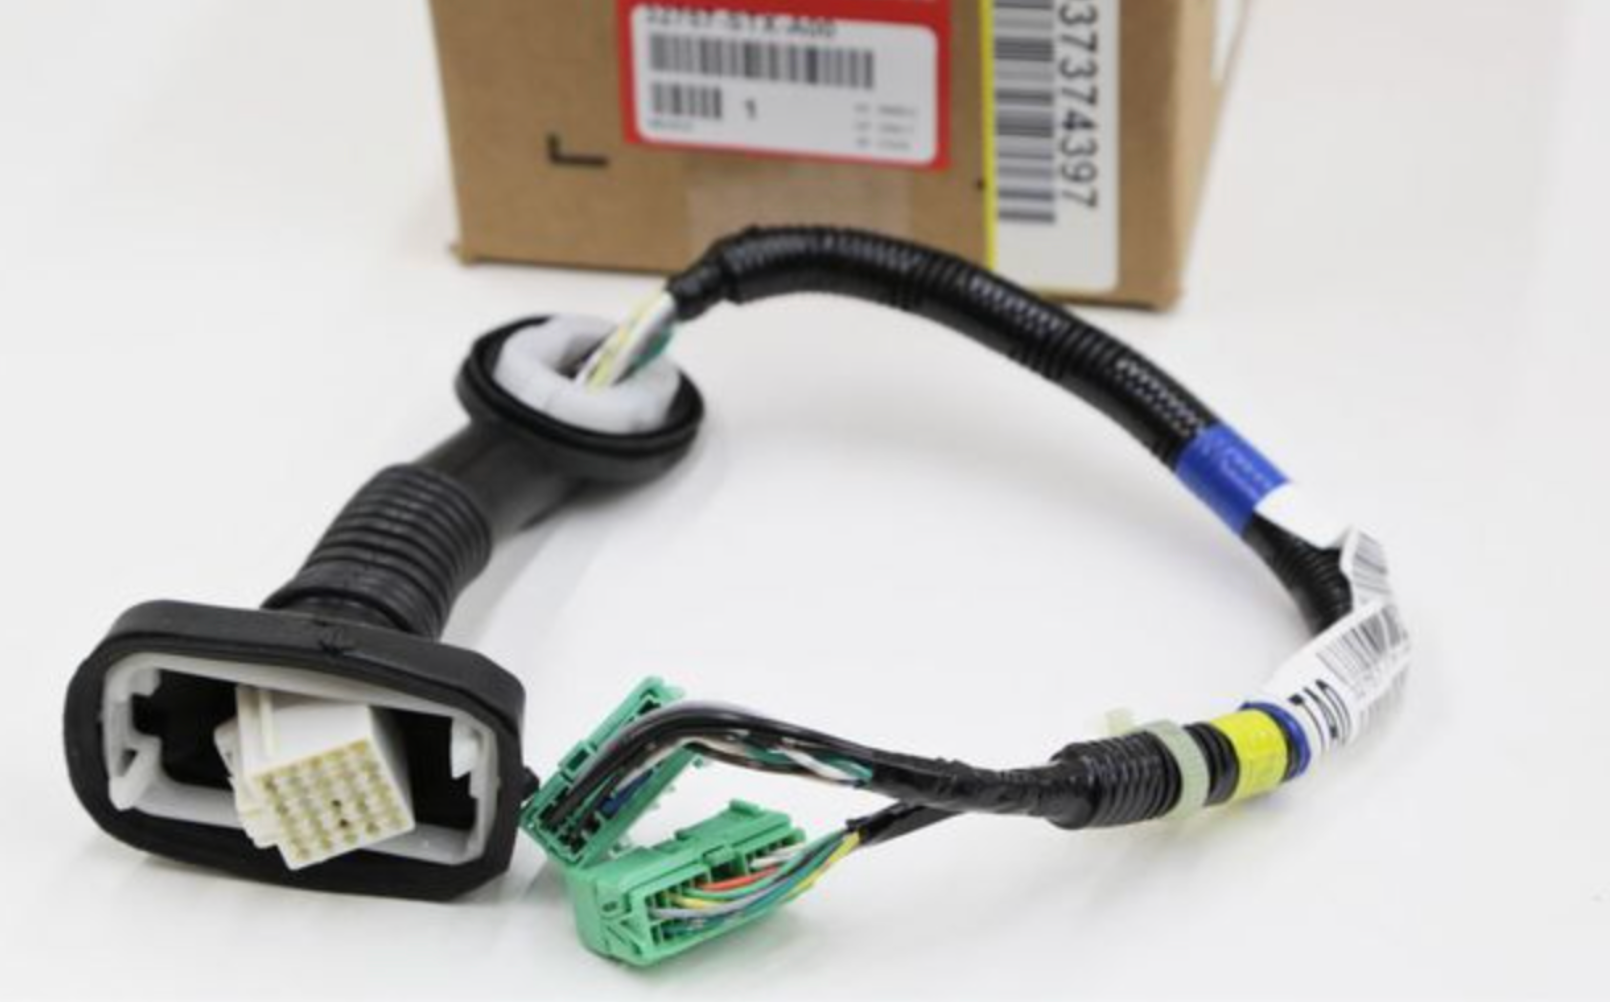 2010-2013 Acura MDX Multiple Electrical Problems Fixed With One Simple Harness.